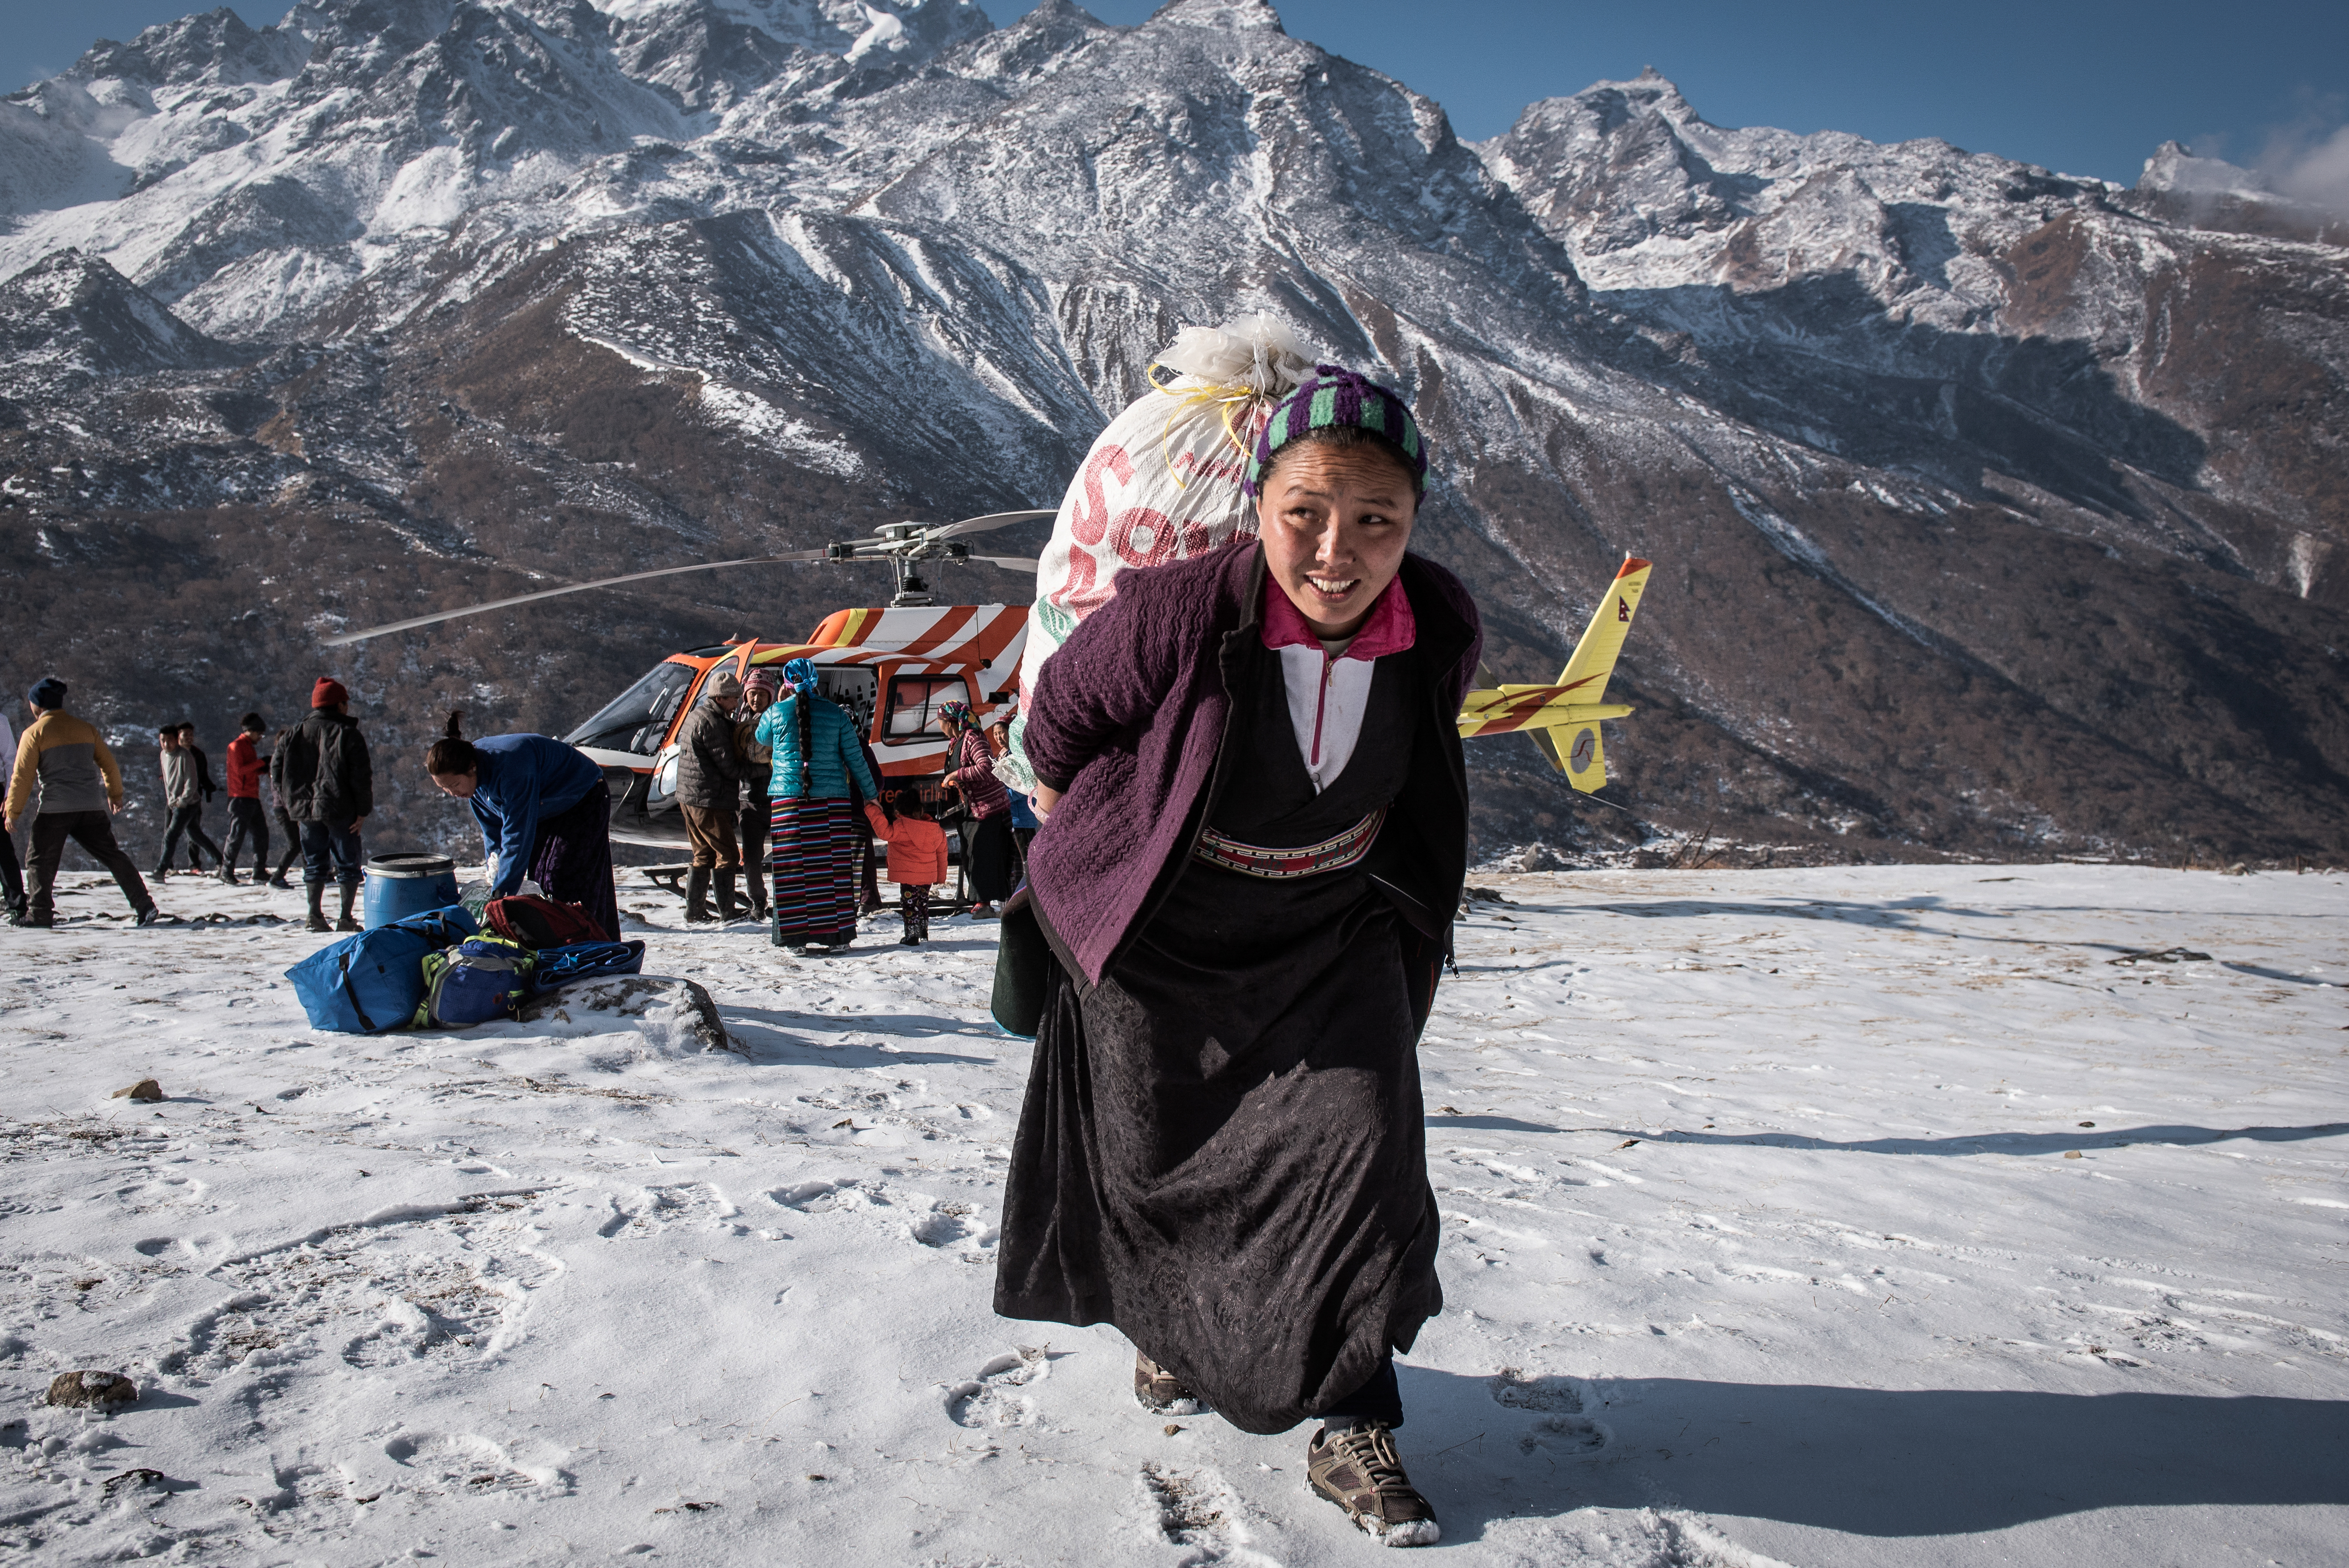 A local woman unloads supplies from a helicopter - Kyanjin Gompa.